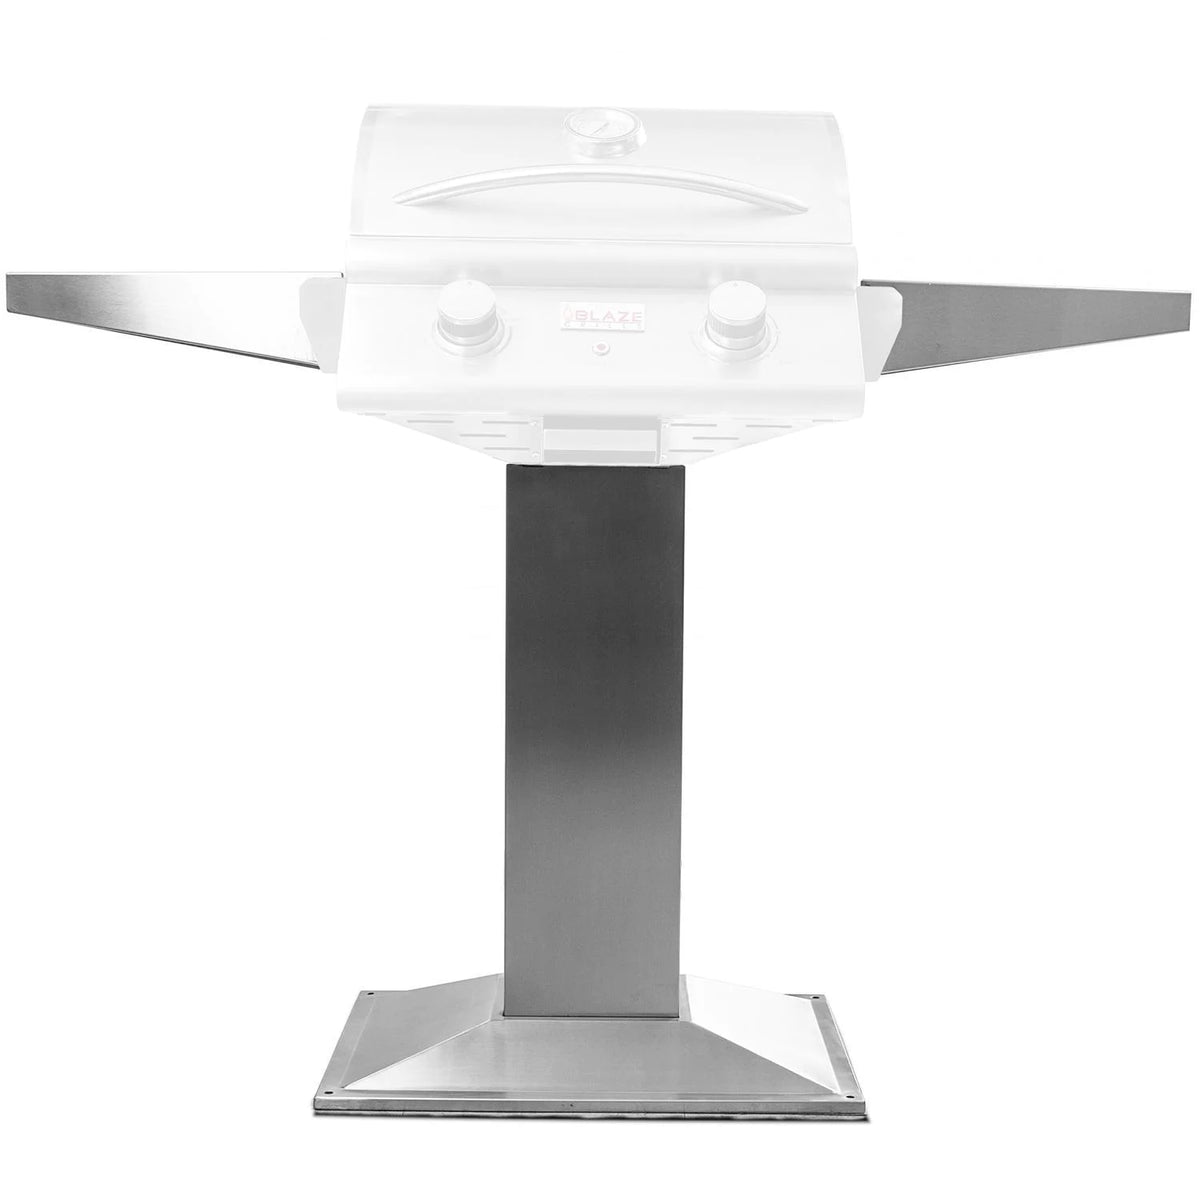 Blaze 21 Inch Electric Grill Pedestal Base Front View